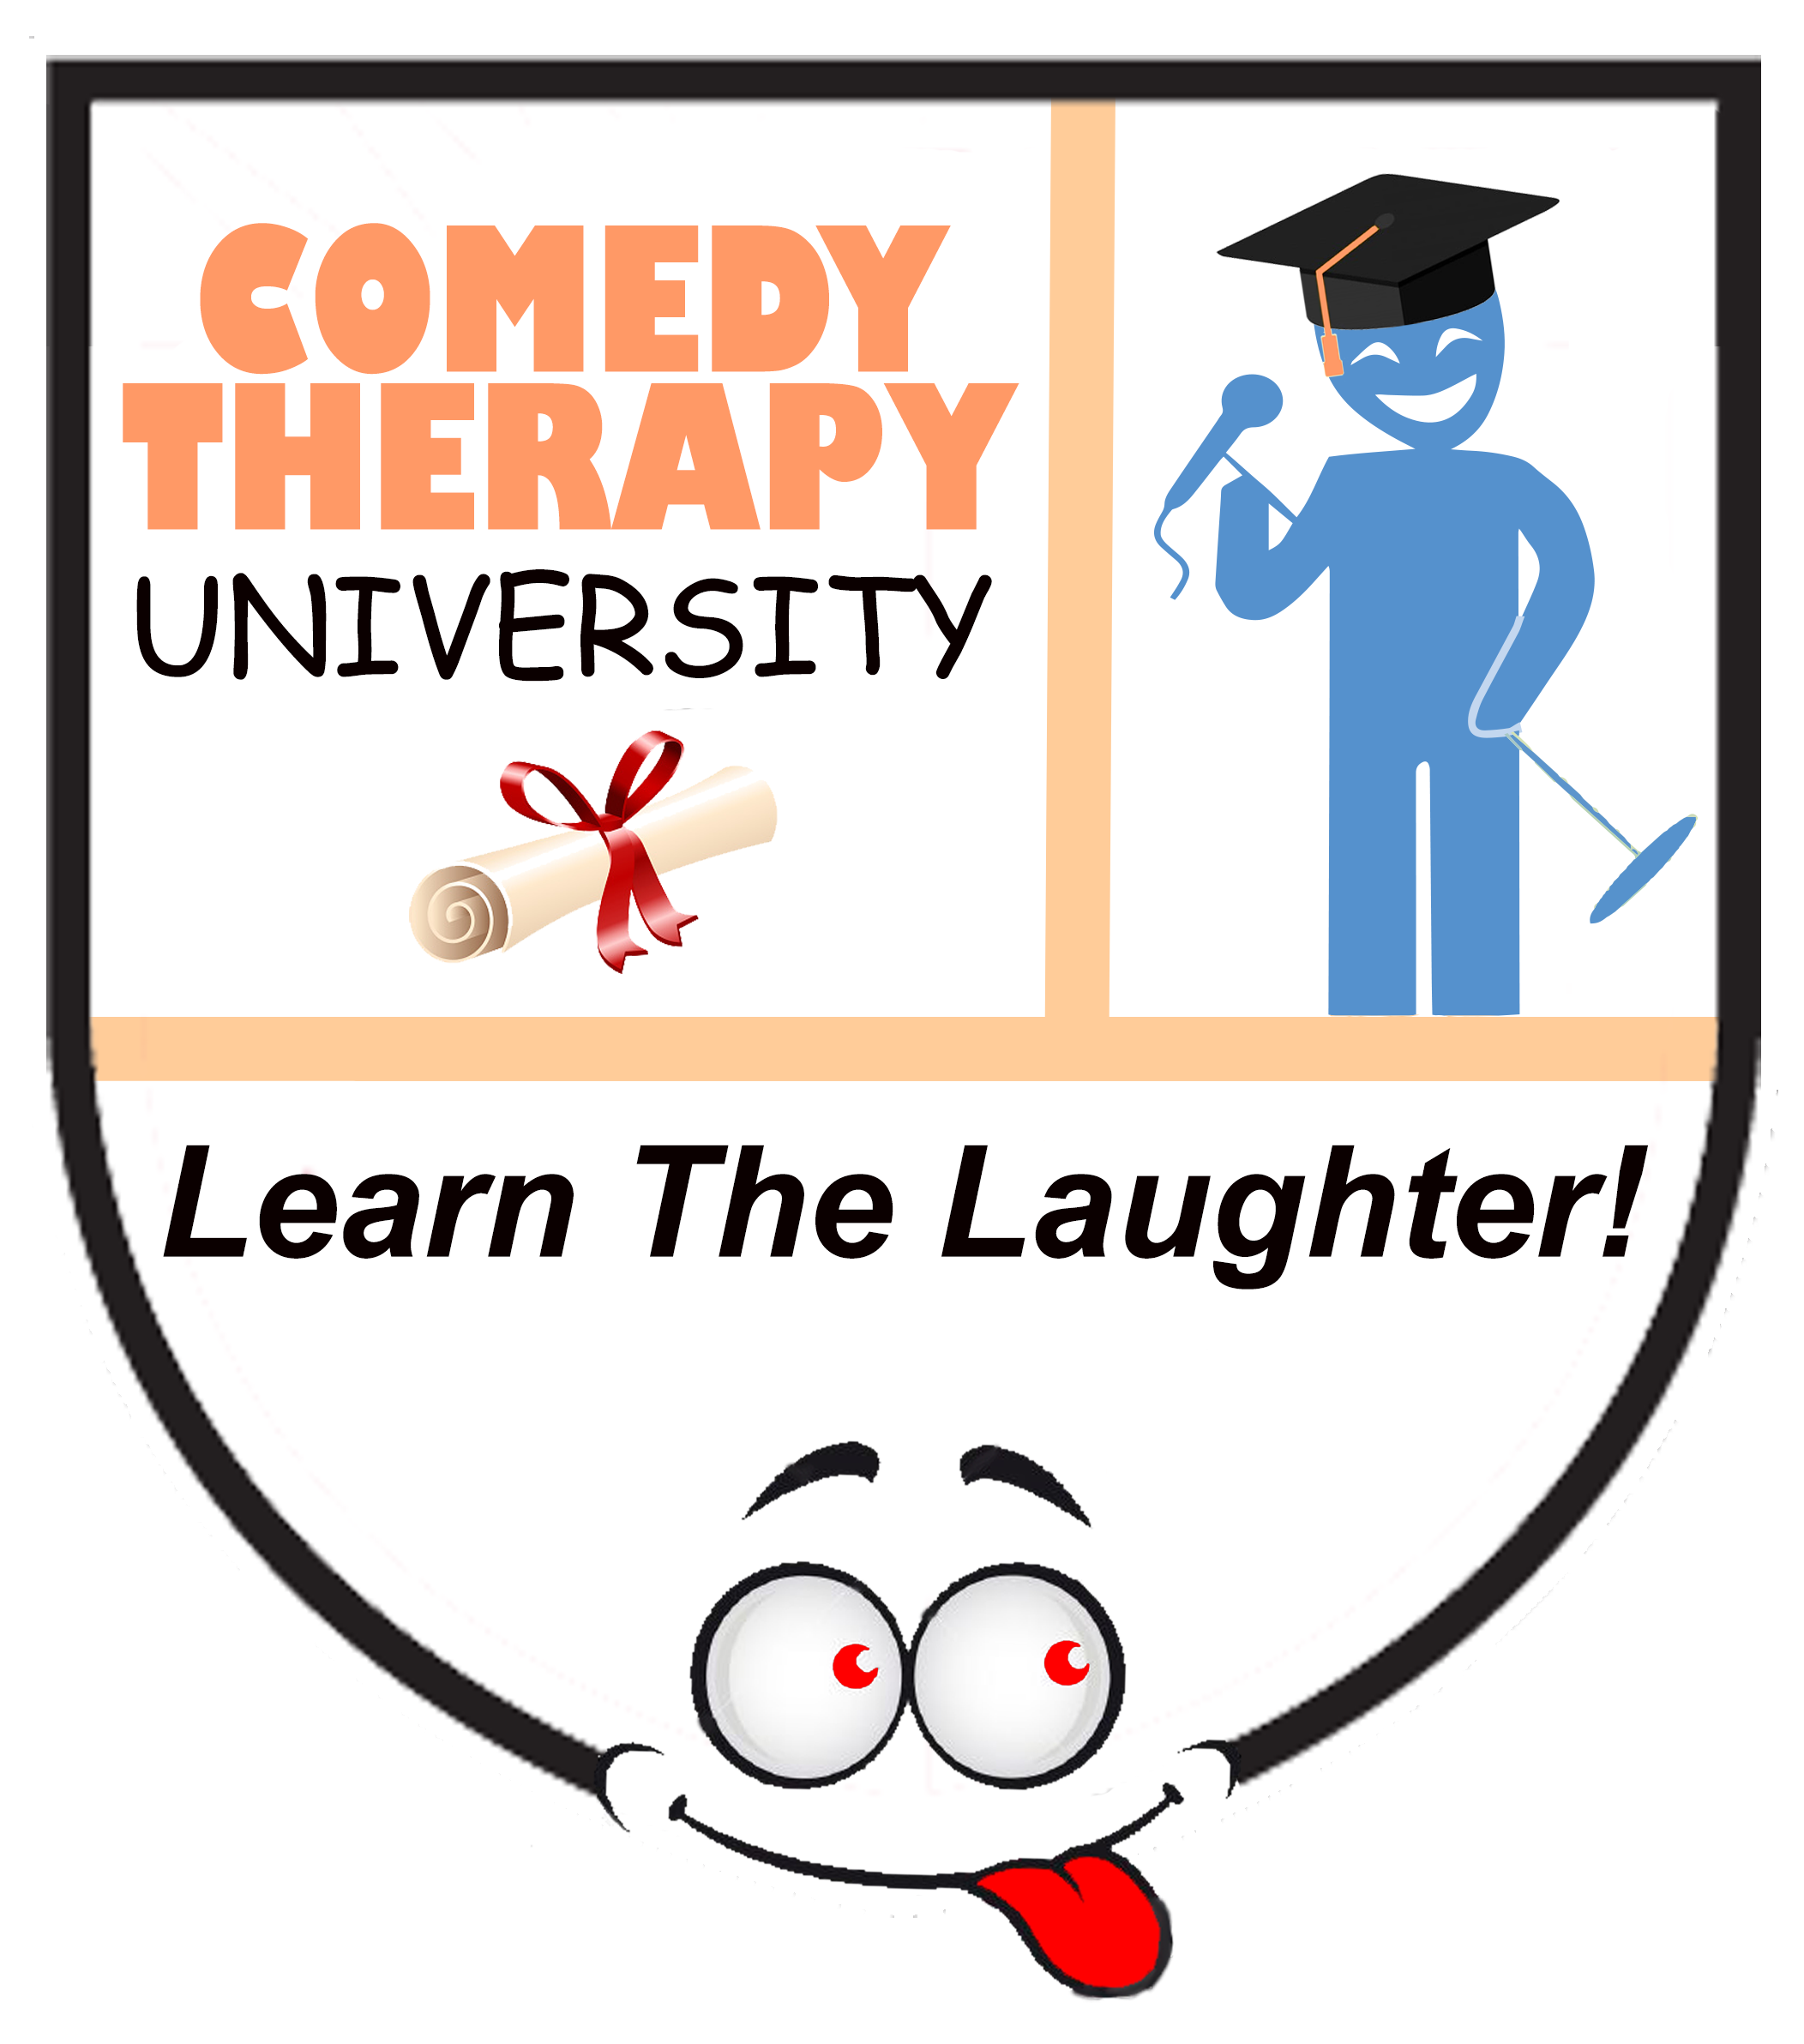 Comedy Therapy University